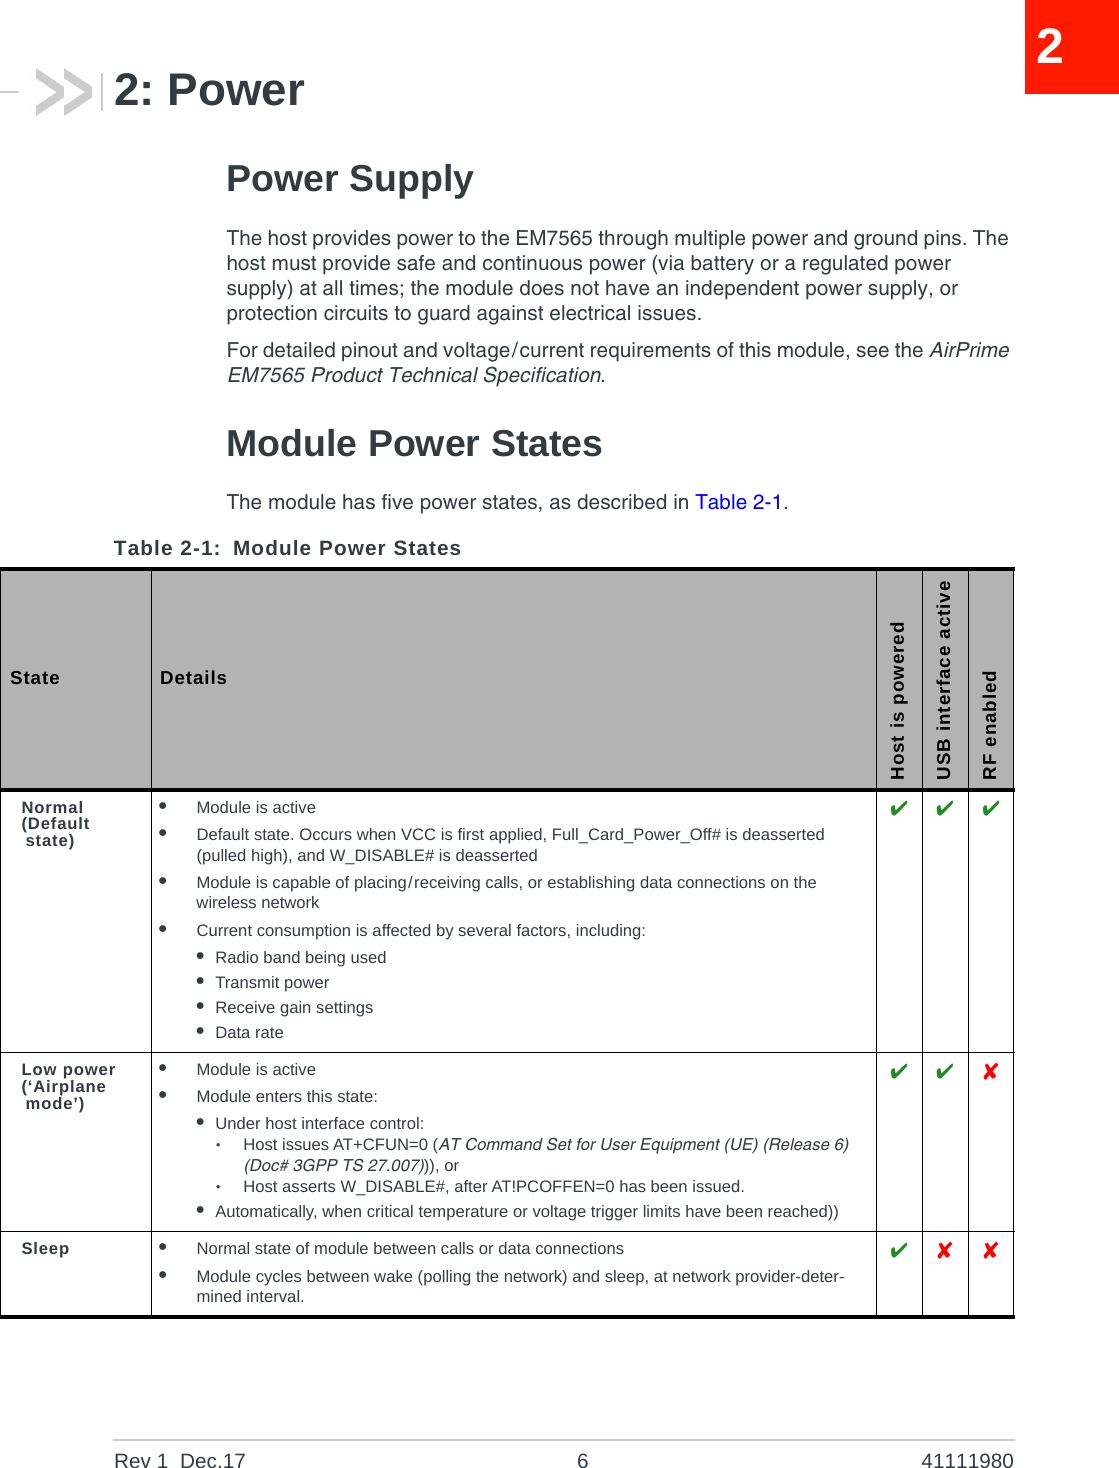 Rev 1  Dec.17 6 4111198022: PowerPower SupplyThe host provides power to the EM7565 through multiple power and ground pins. The host must provide safe and continuous power (via battery or a regulated power supply) at all times; the module does not have an independent power supply, or protection circuits to guard against electrical issues.For detailed pinout and voltage/current requirements of this module, see the AirPrime EM7565 Product Technical Specification.Module Power StatesThe module has five power states, as described in Table 2-1. Table 2-1: Module Power StatesState DetailsHost is poweredUSB interface activeRF enabledNormal(Default state)•Module is active•Default state. Occurs when VCC is first applied, Full_Card_Power_Off# is deasserted (pulled high), and W_DISABLE# is deasserted•Module is capable of placing/receiving calls, or establishing data connections on the wireless network•Current consumption is affected by several factors, including:•Radio band being used•Transmit power•Receive gain settings•Data rate  Low power(‘Airplane mode’)•Module is active•Module enters this state:•Under host interface control:·Host issues AT+CFUN=0 (AT Command Set for User Equipment (UE) (Release 6) (Doc# 3GPP TS 27.007))), or·Host asserts W_DISABLE#, after AT!PCOFFEN=0 has been issued.•Automatically, when critical temperature or voltage trigger limits have been reached))  Sleep •Normal state of module between calls or data connections•Module cycles between wake (polling the network) and sleep, at network provider-deter-mined interval. 